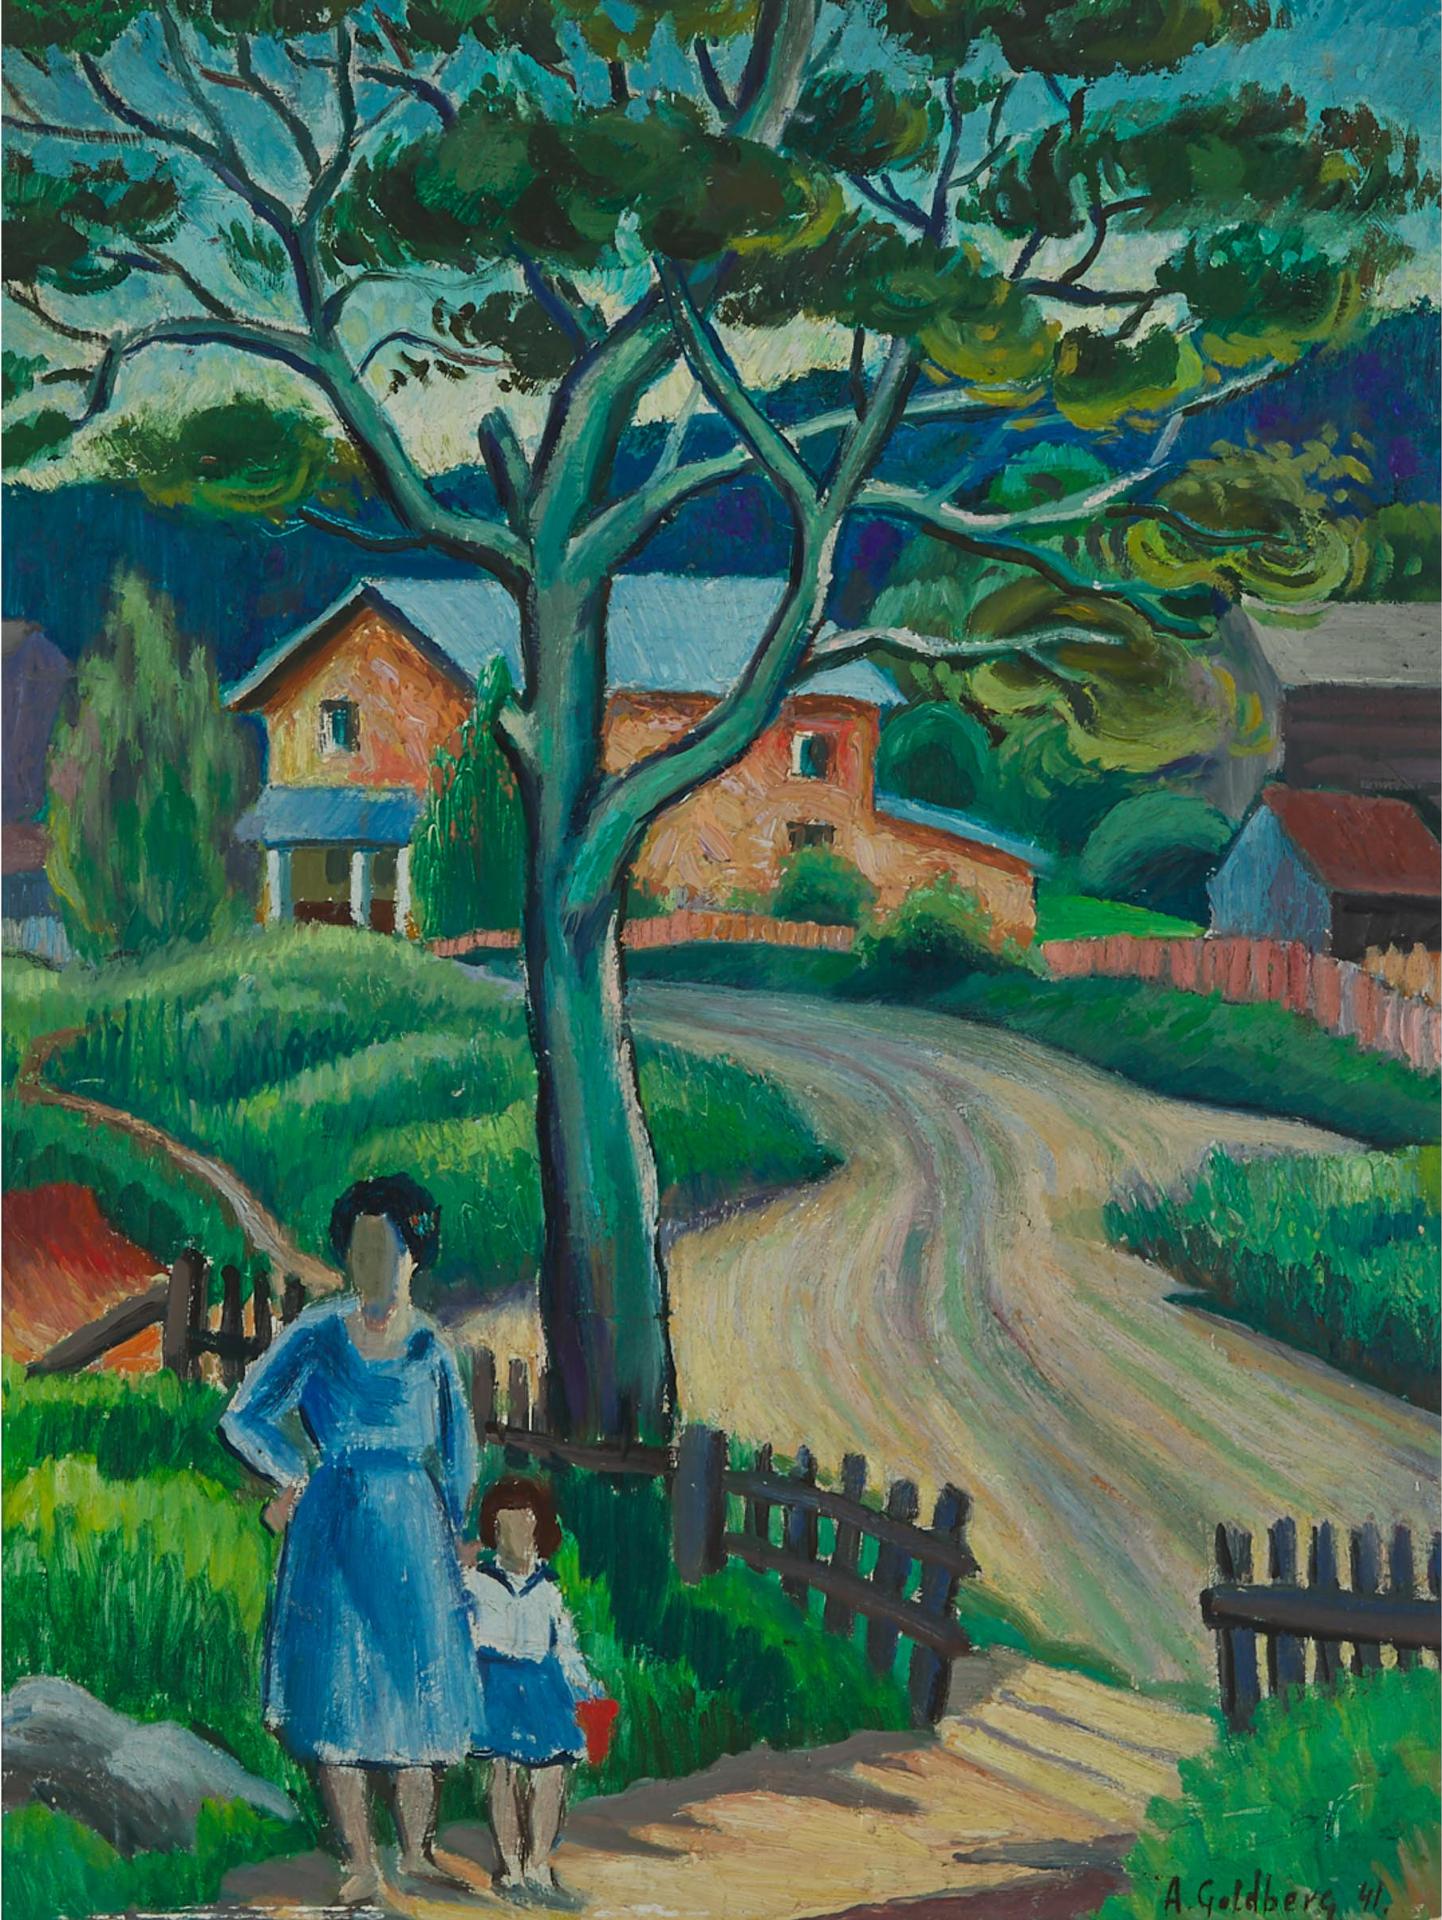 Abe Goldberg (1941-1950) - Farm With Mother And Child, 1941